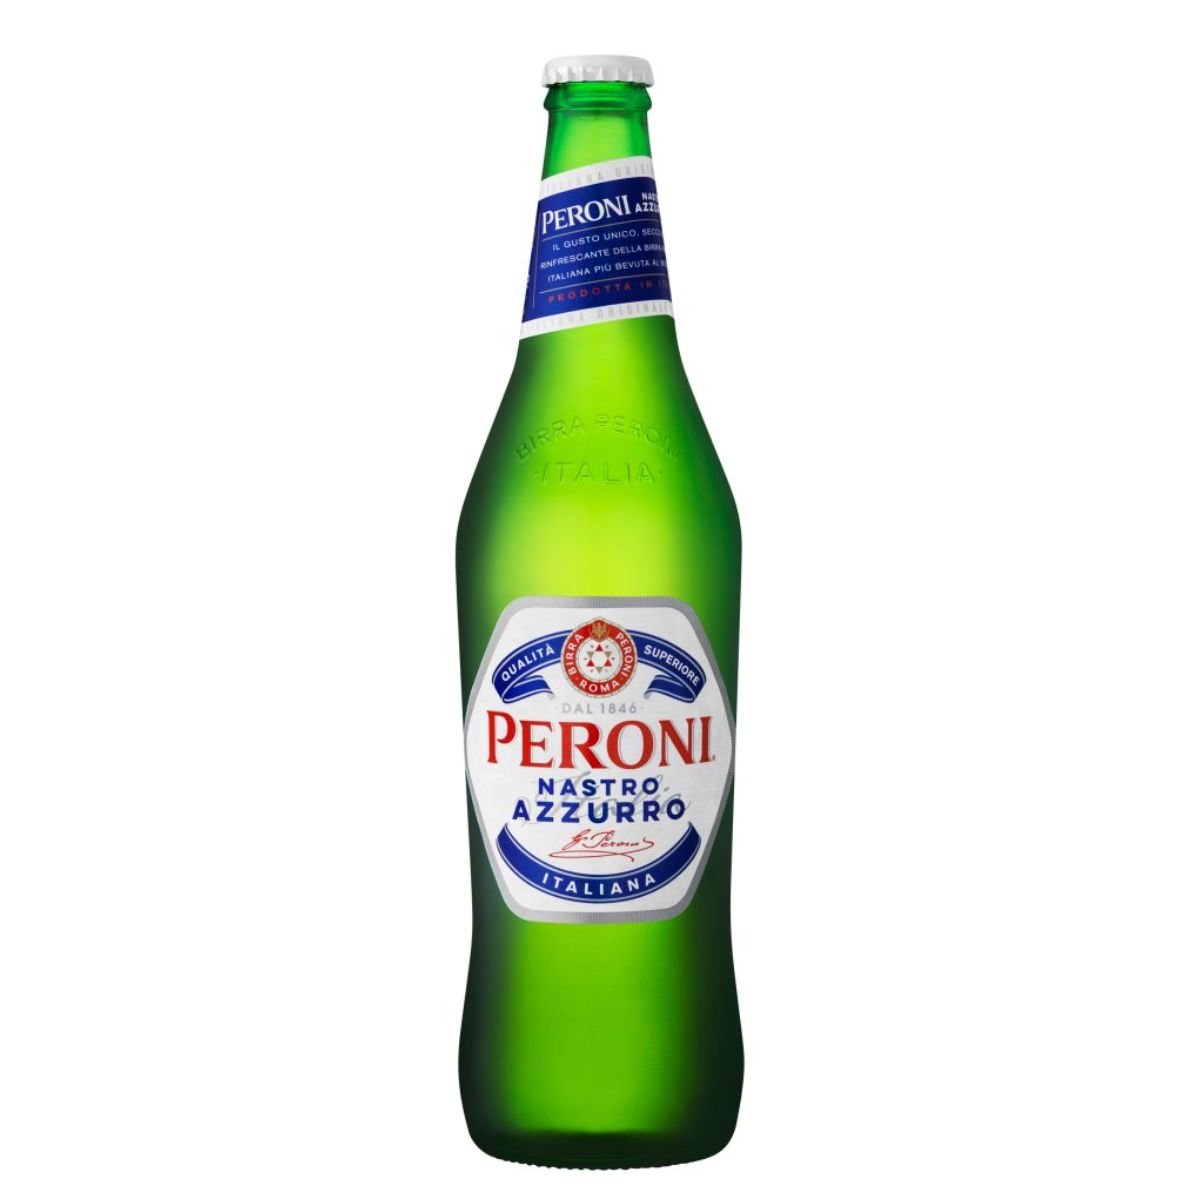 A bottle of Peroni - Nastro Azzurro Lager Beer Bottle (5.0% ABV) - 620ml on a white background.